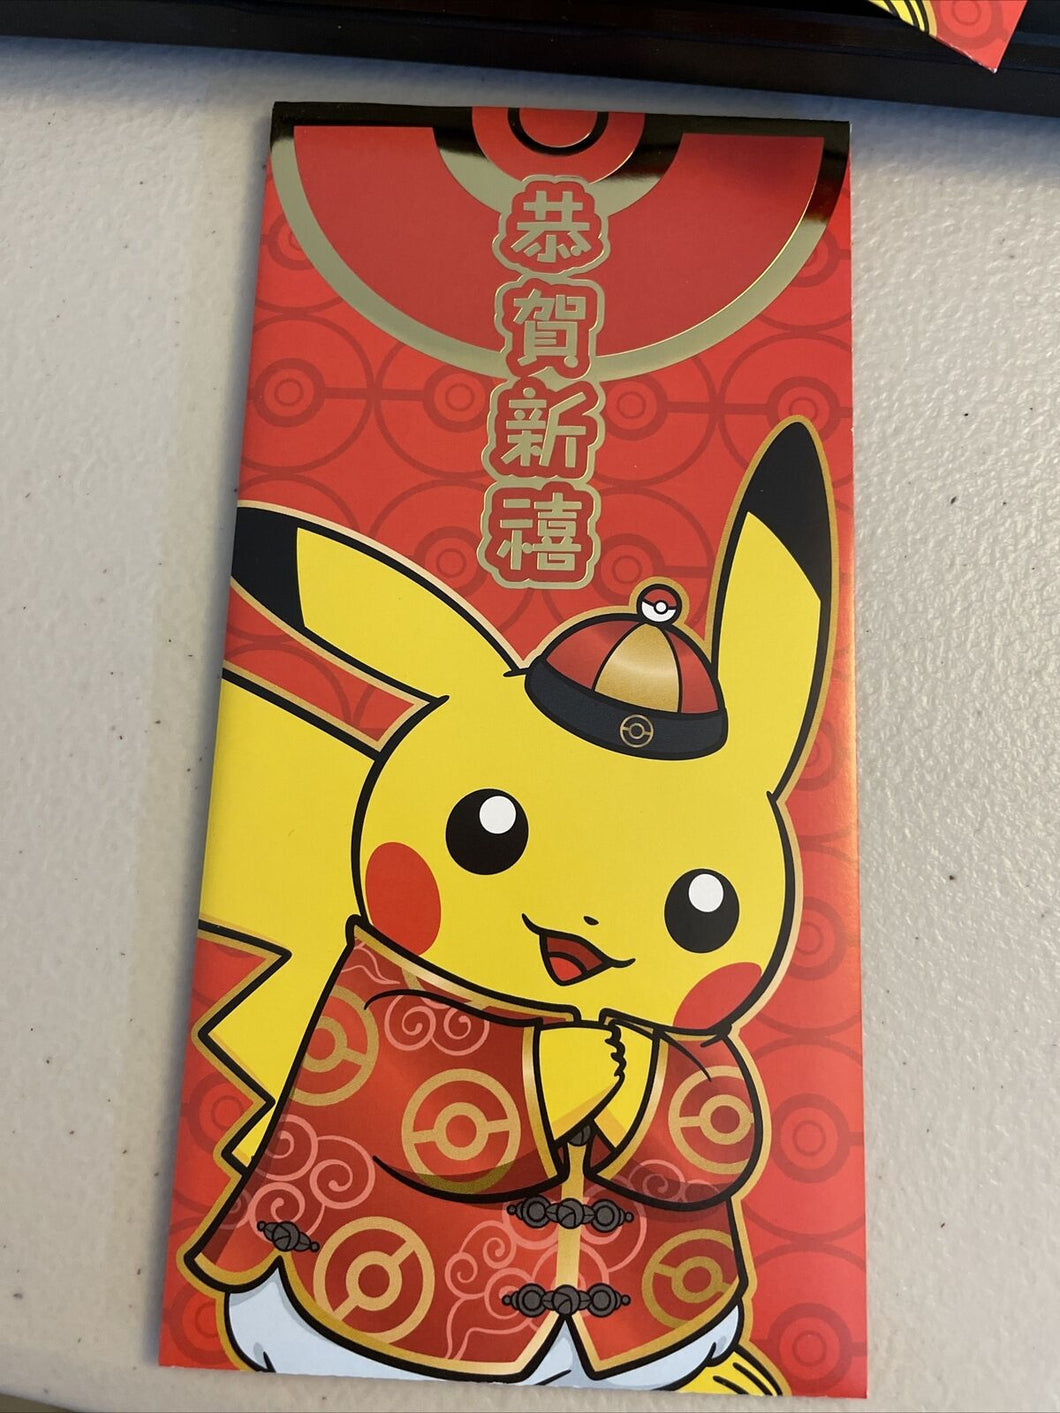 2021 Pokemon Chinese New Year Red Envelope with Pikachu Promo